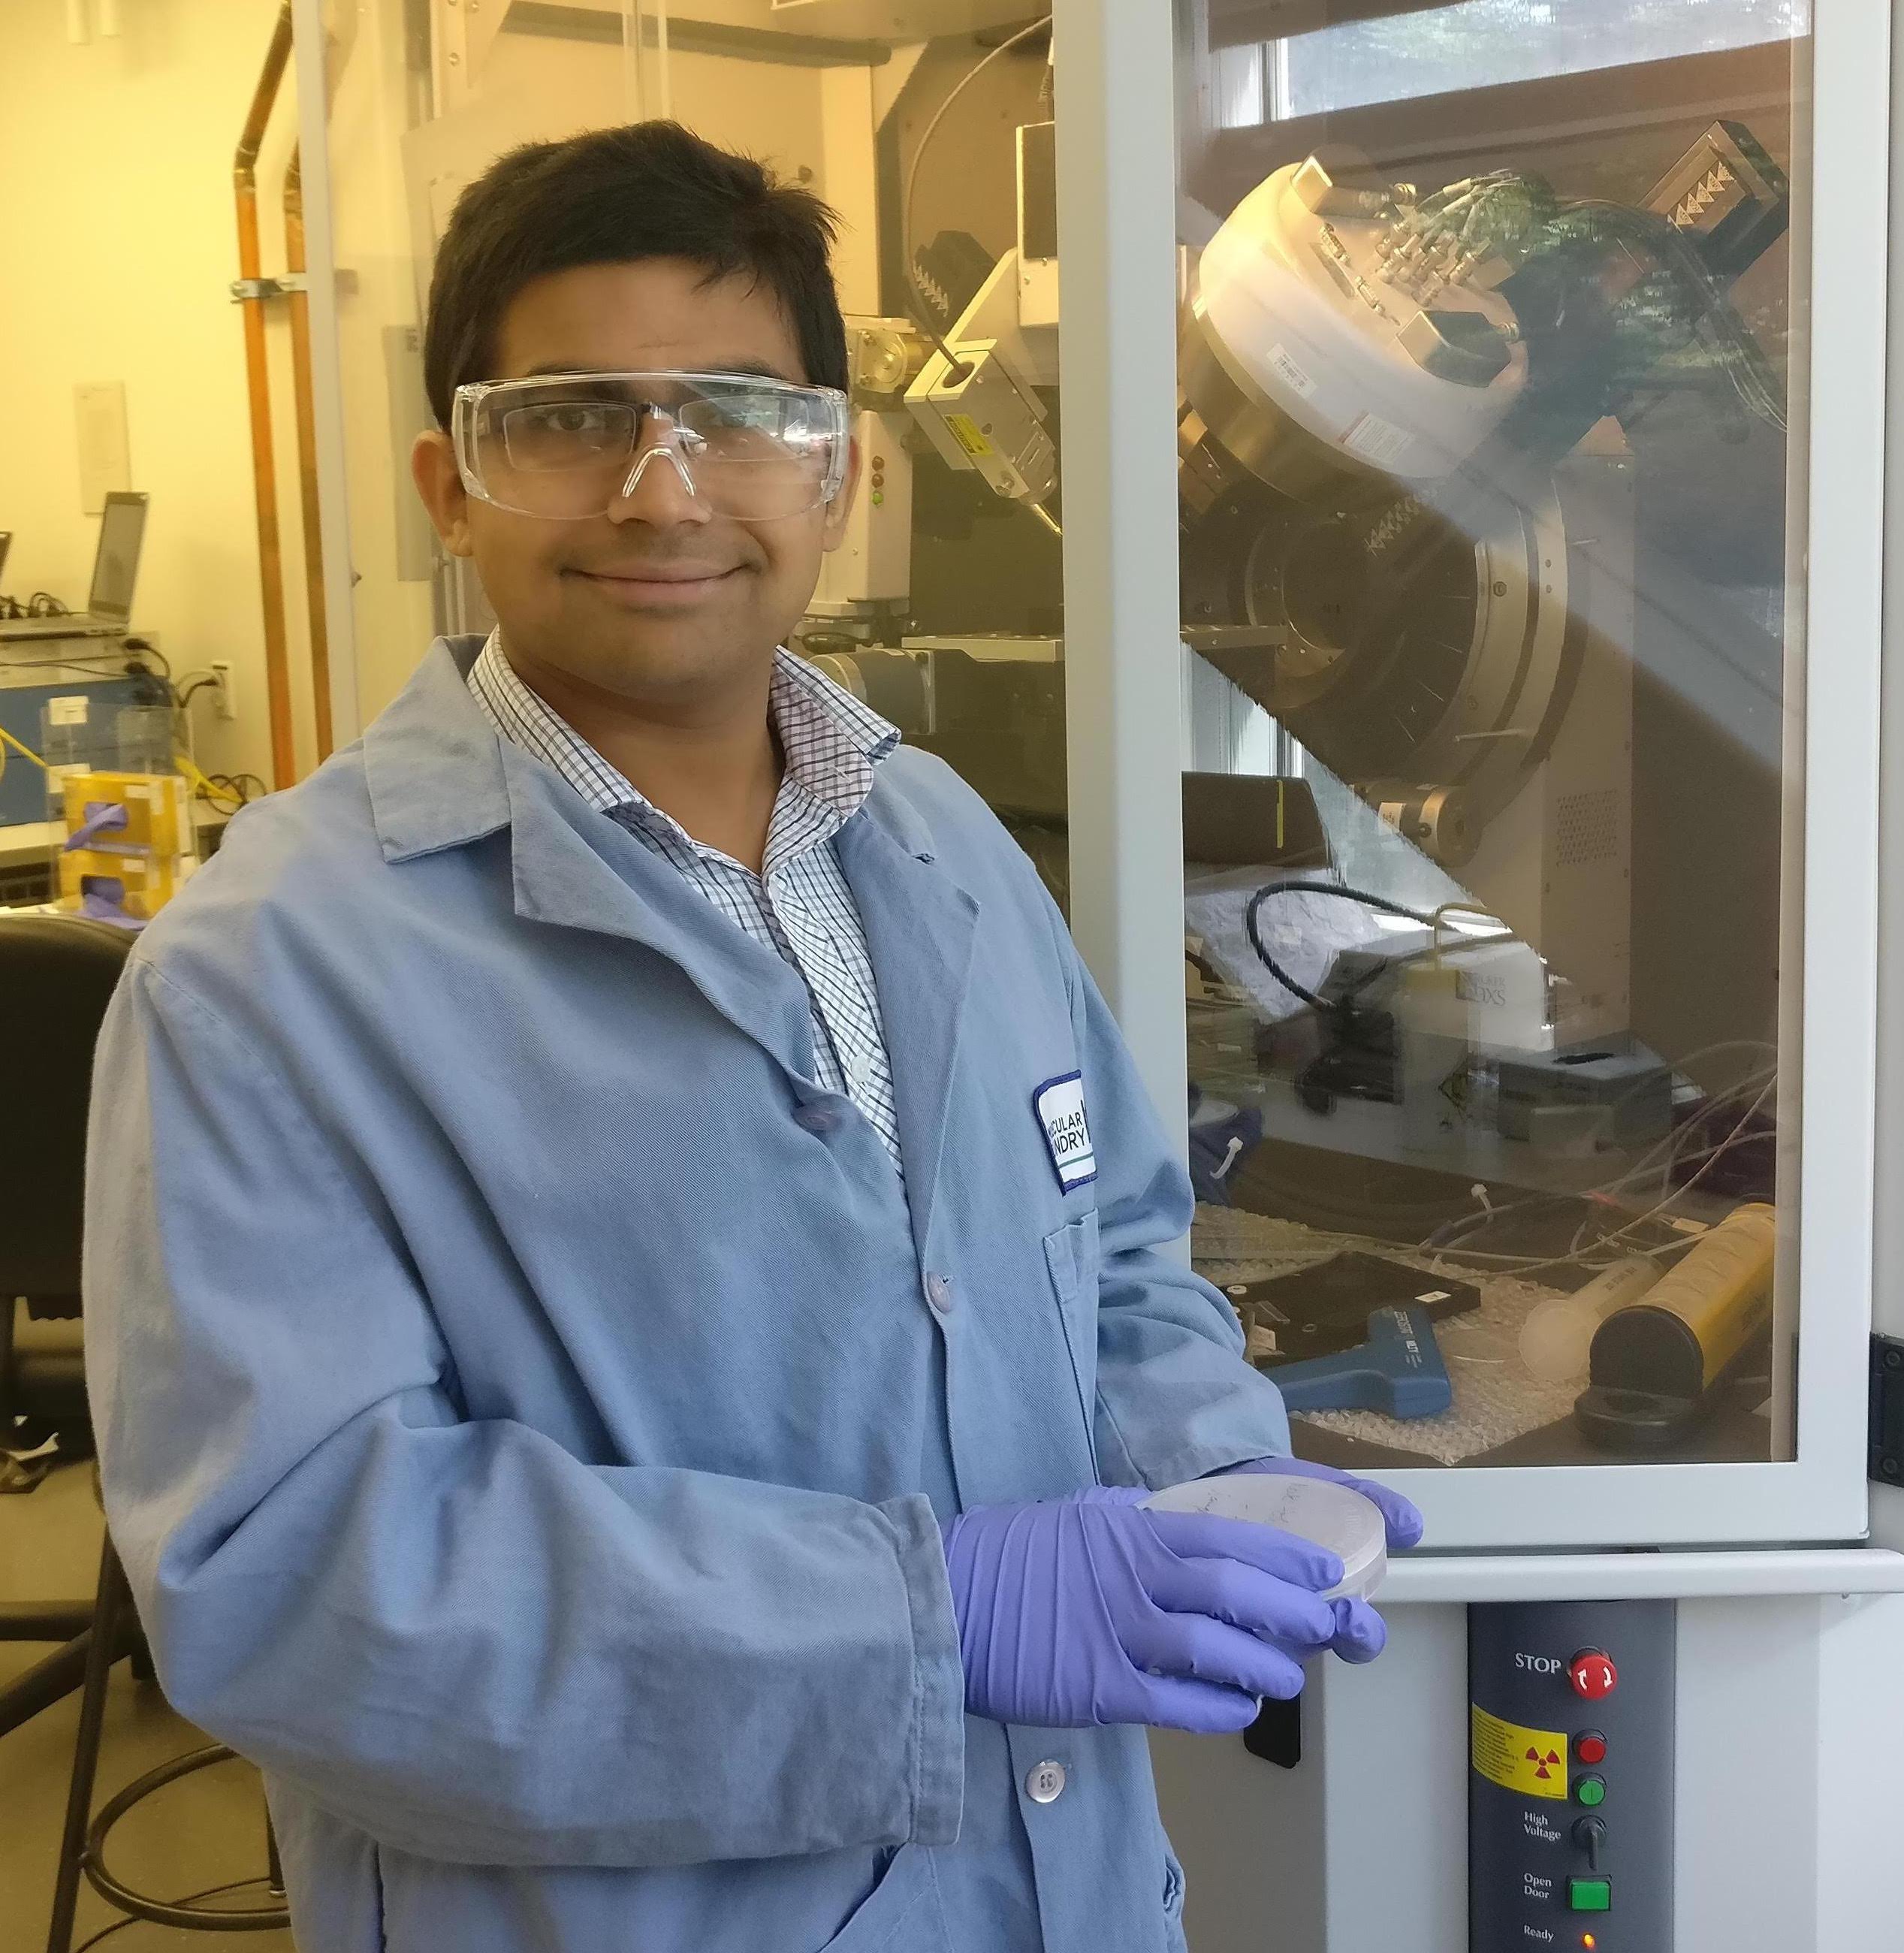 Kumar conducts experiments at the Molecular Foundry to determine the crystal structure of materials (iron oxides) for removing contaminants such as arsenic for safe drinking water.